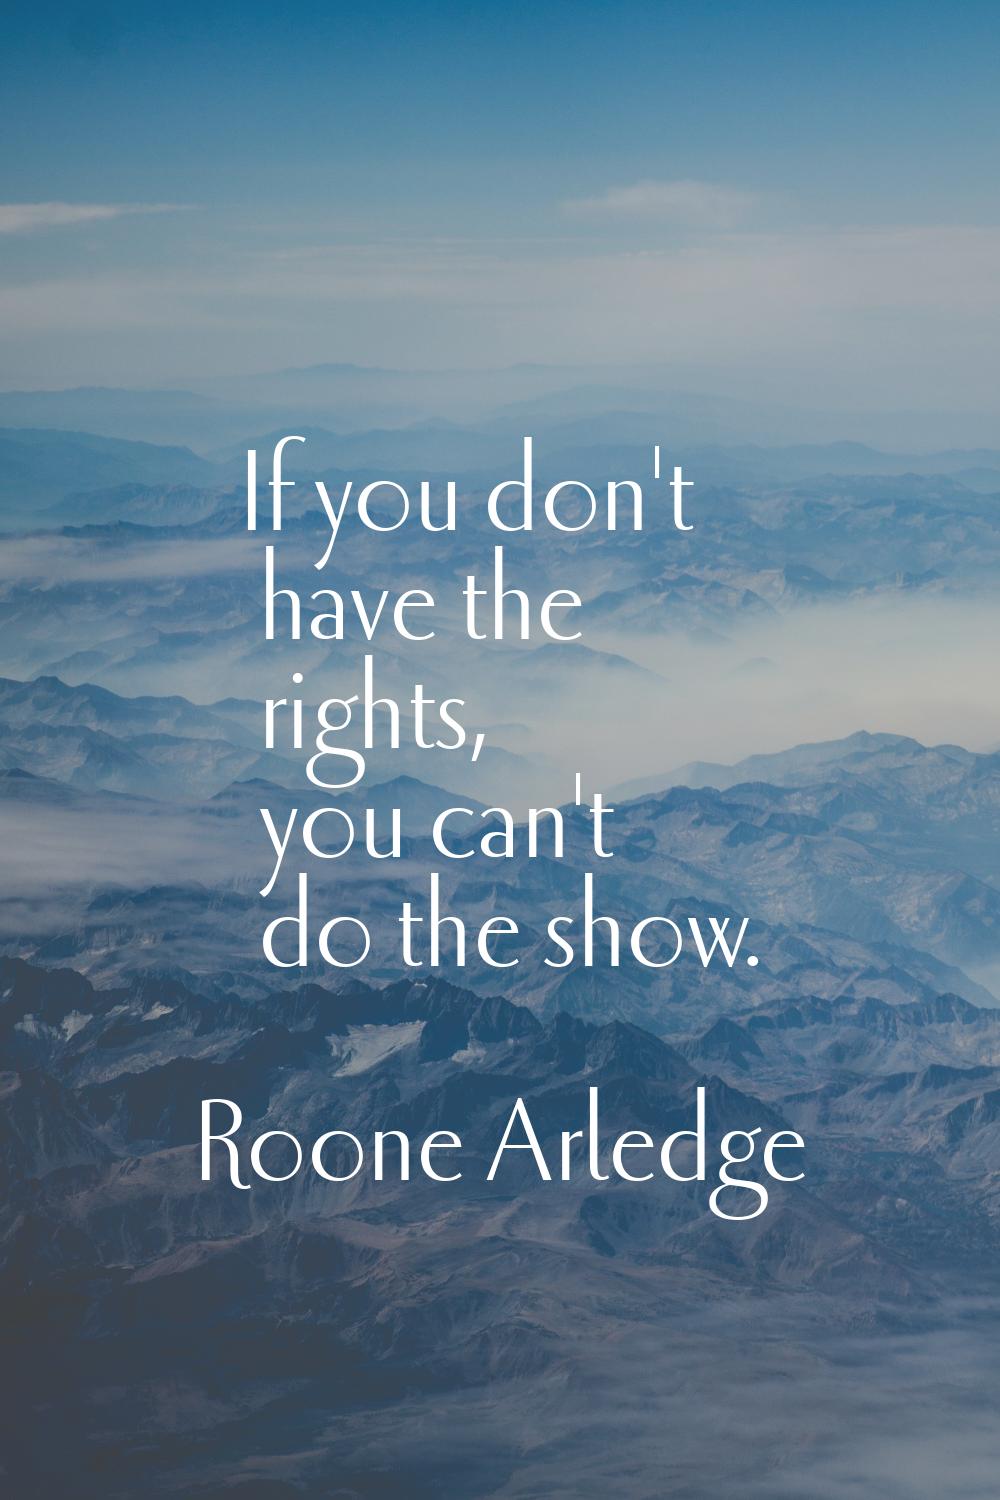 If you don't have the rights, you can't do the show.